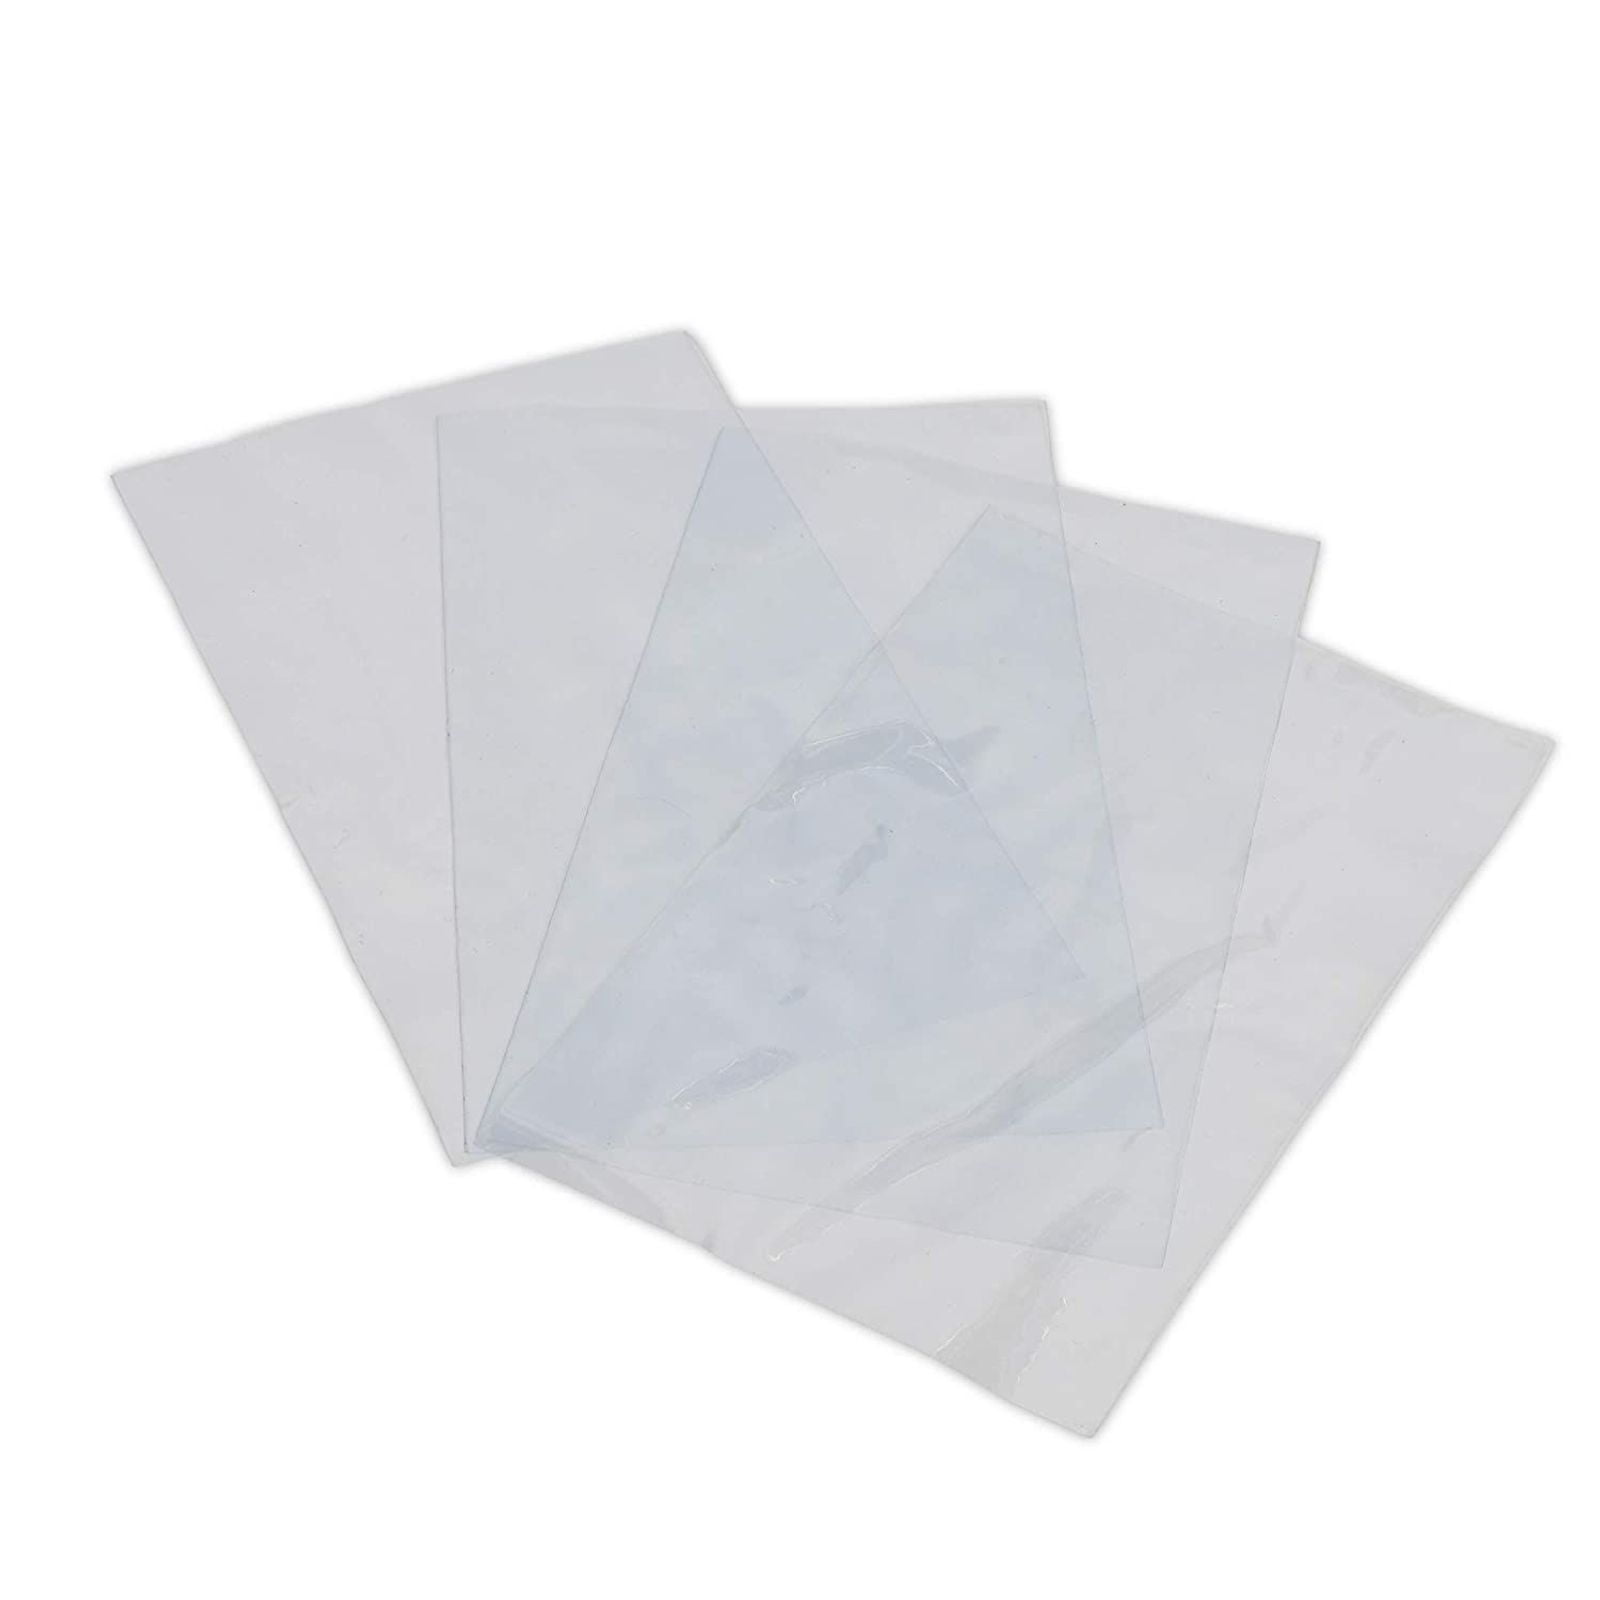 4x8 inch Odorless 100 Pack Clear PVC Heat Shrink Wrap Bags 100 Guage 